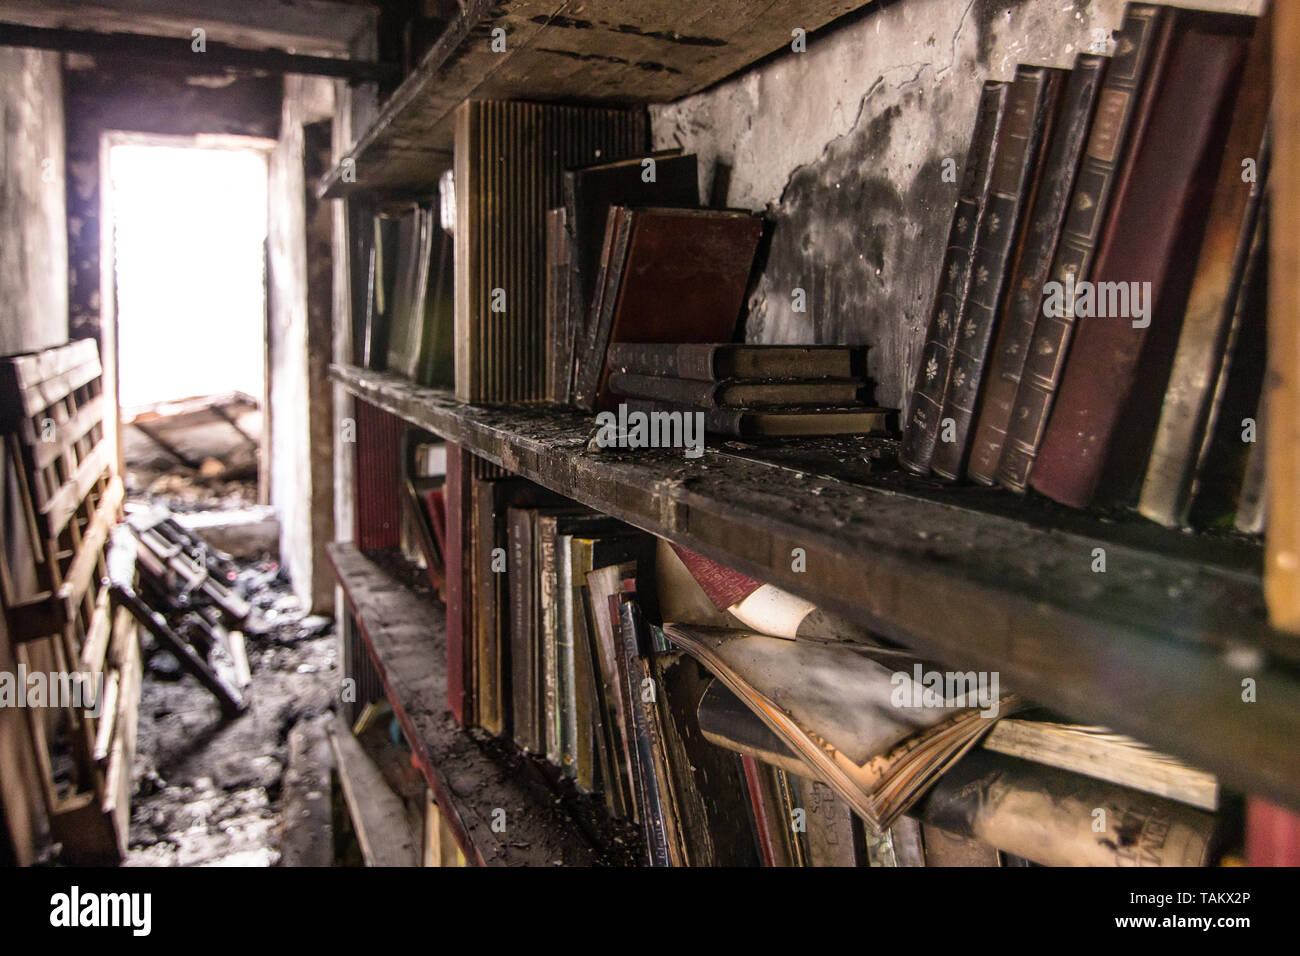 Book burnt in a bookcase after a fire.Disaster, Ignorance, Brain Washing, Desolation. Stock Photo